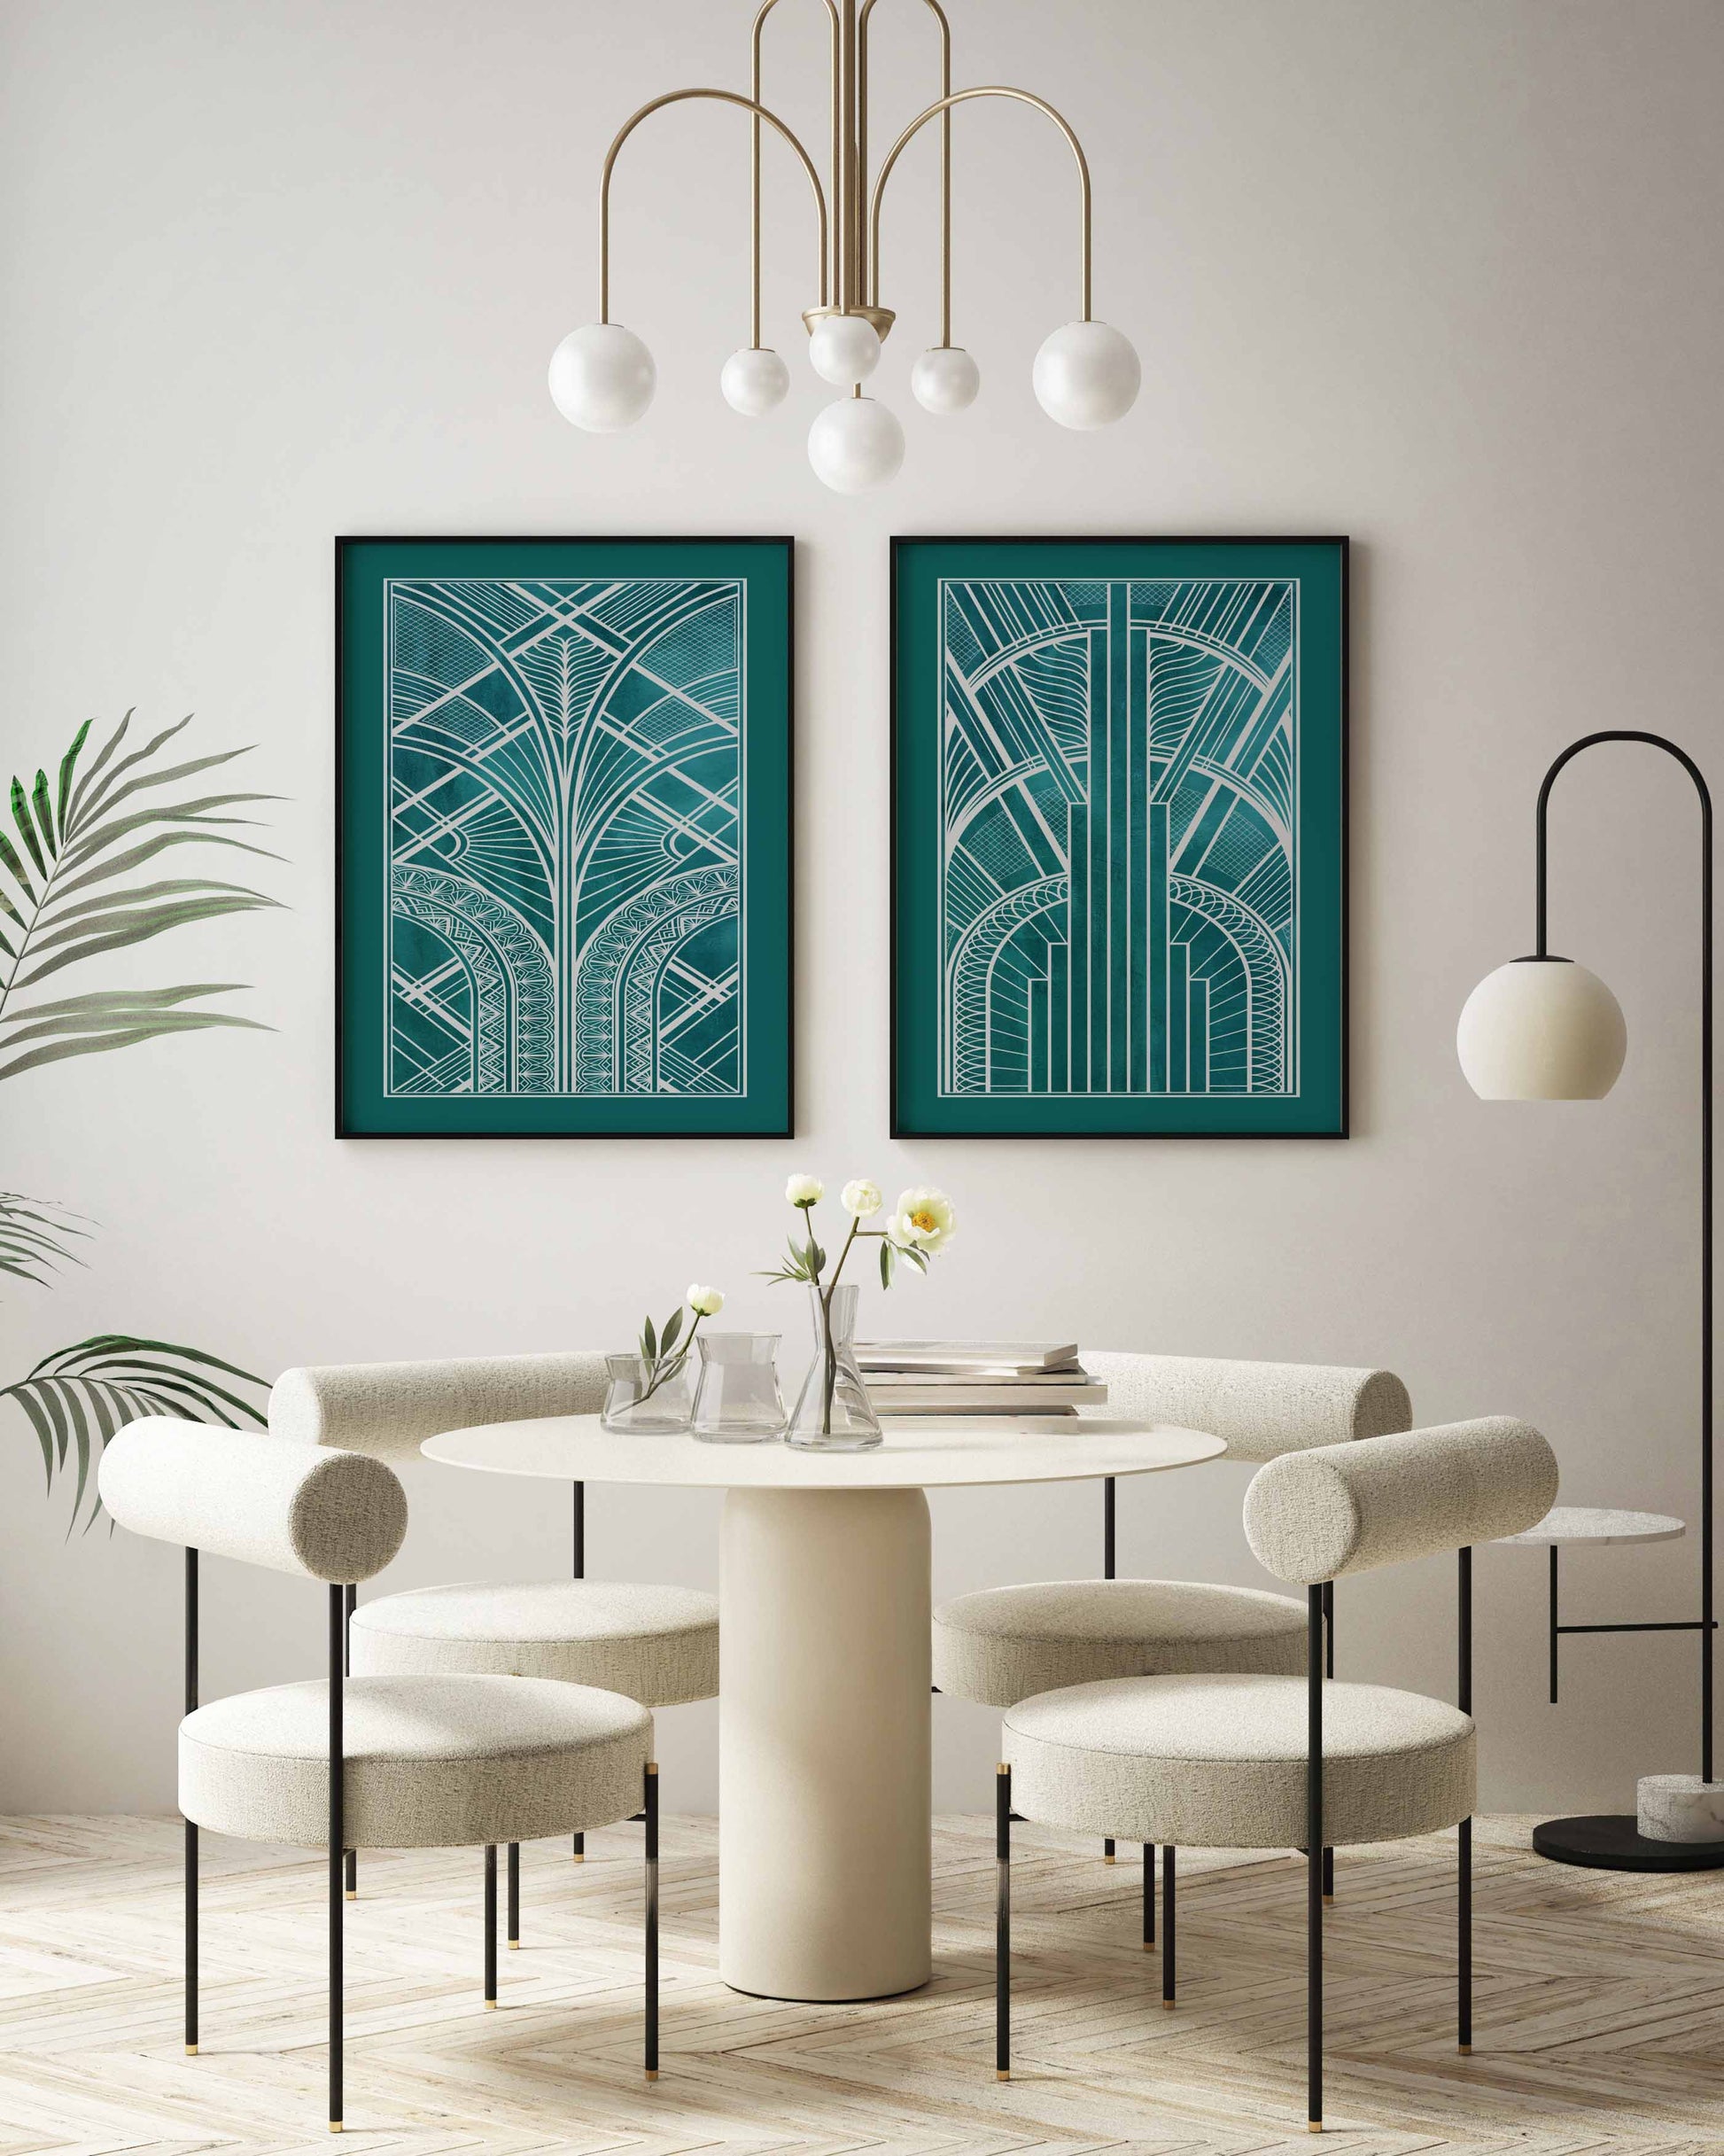 Art deco set of prints in silver and teal